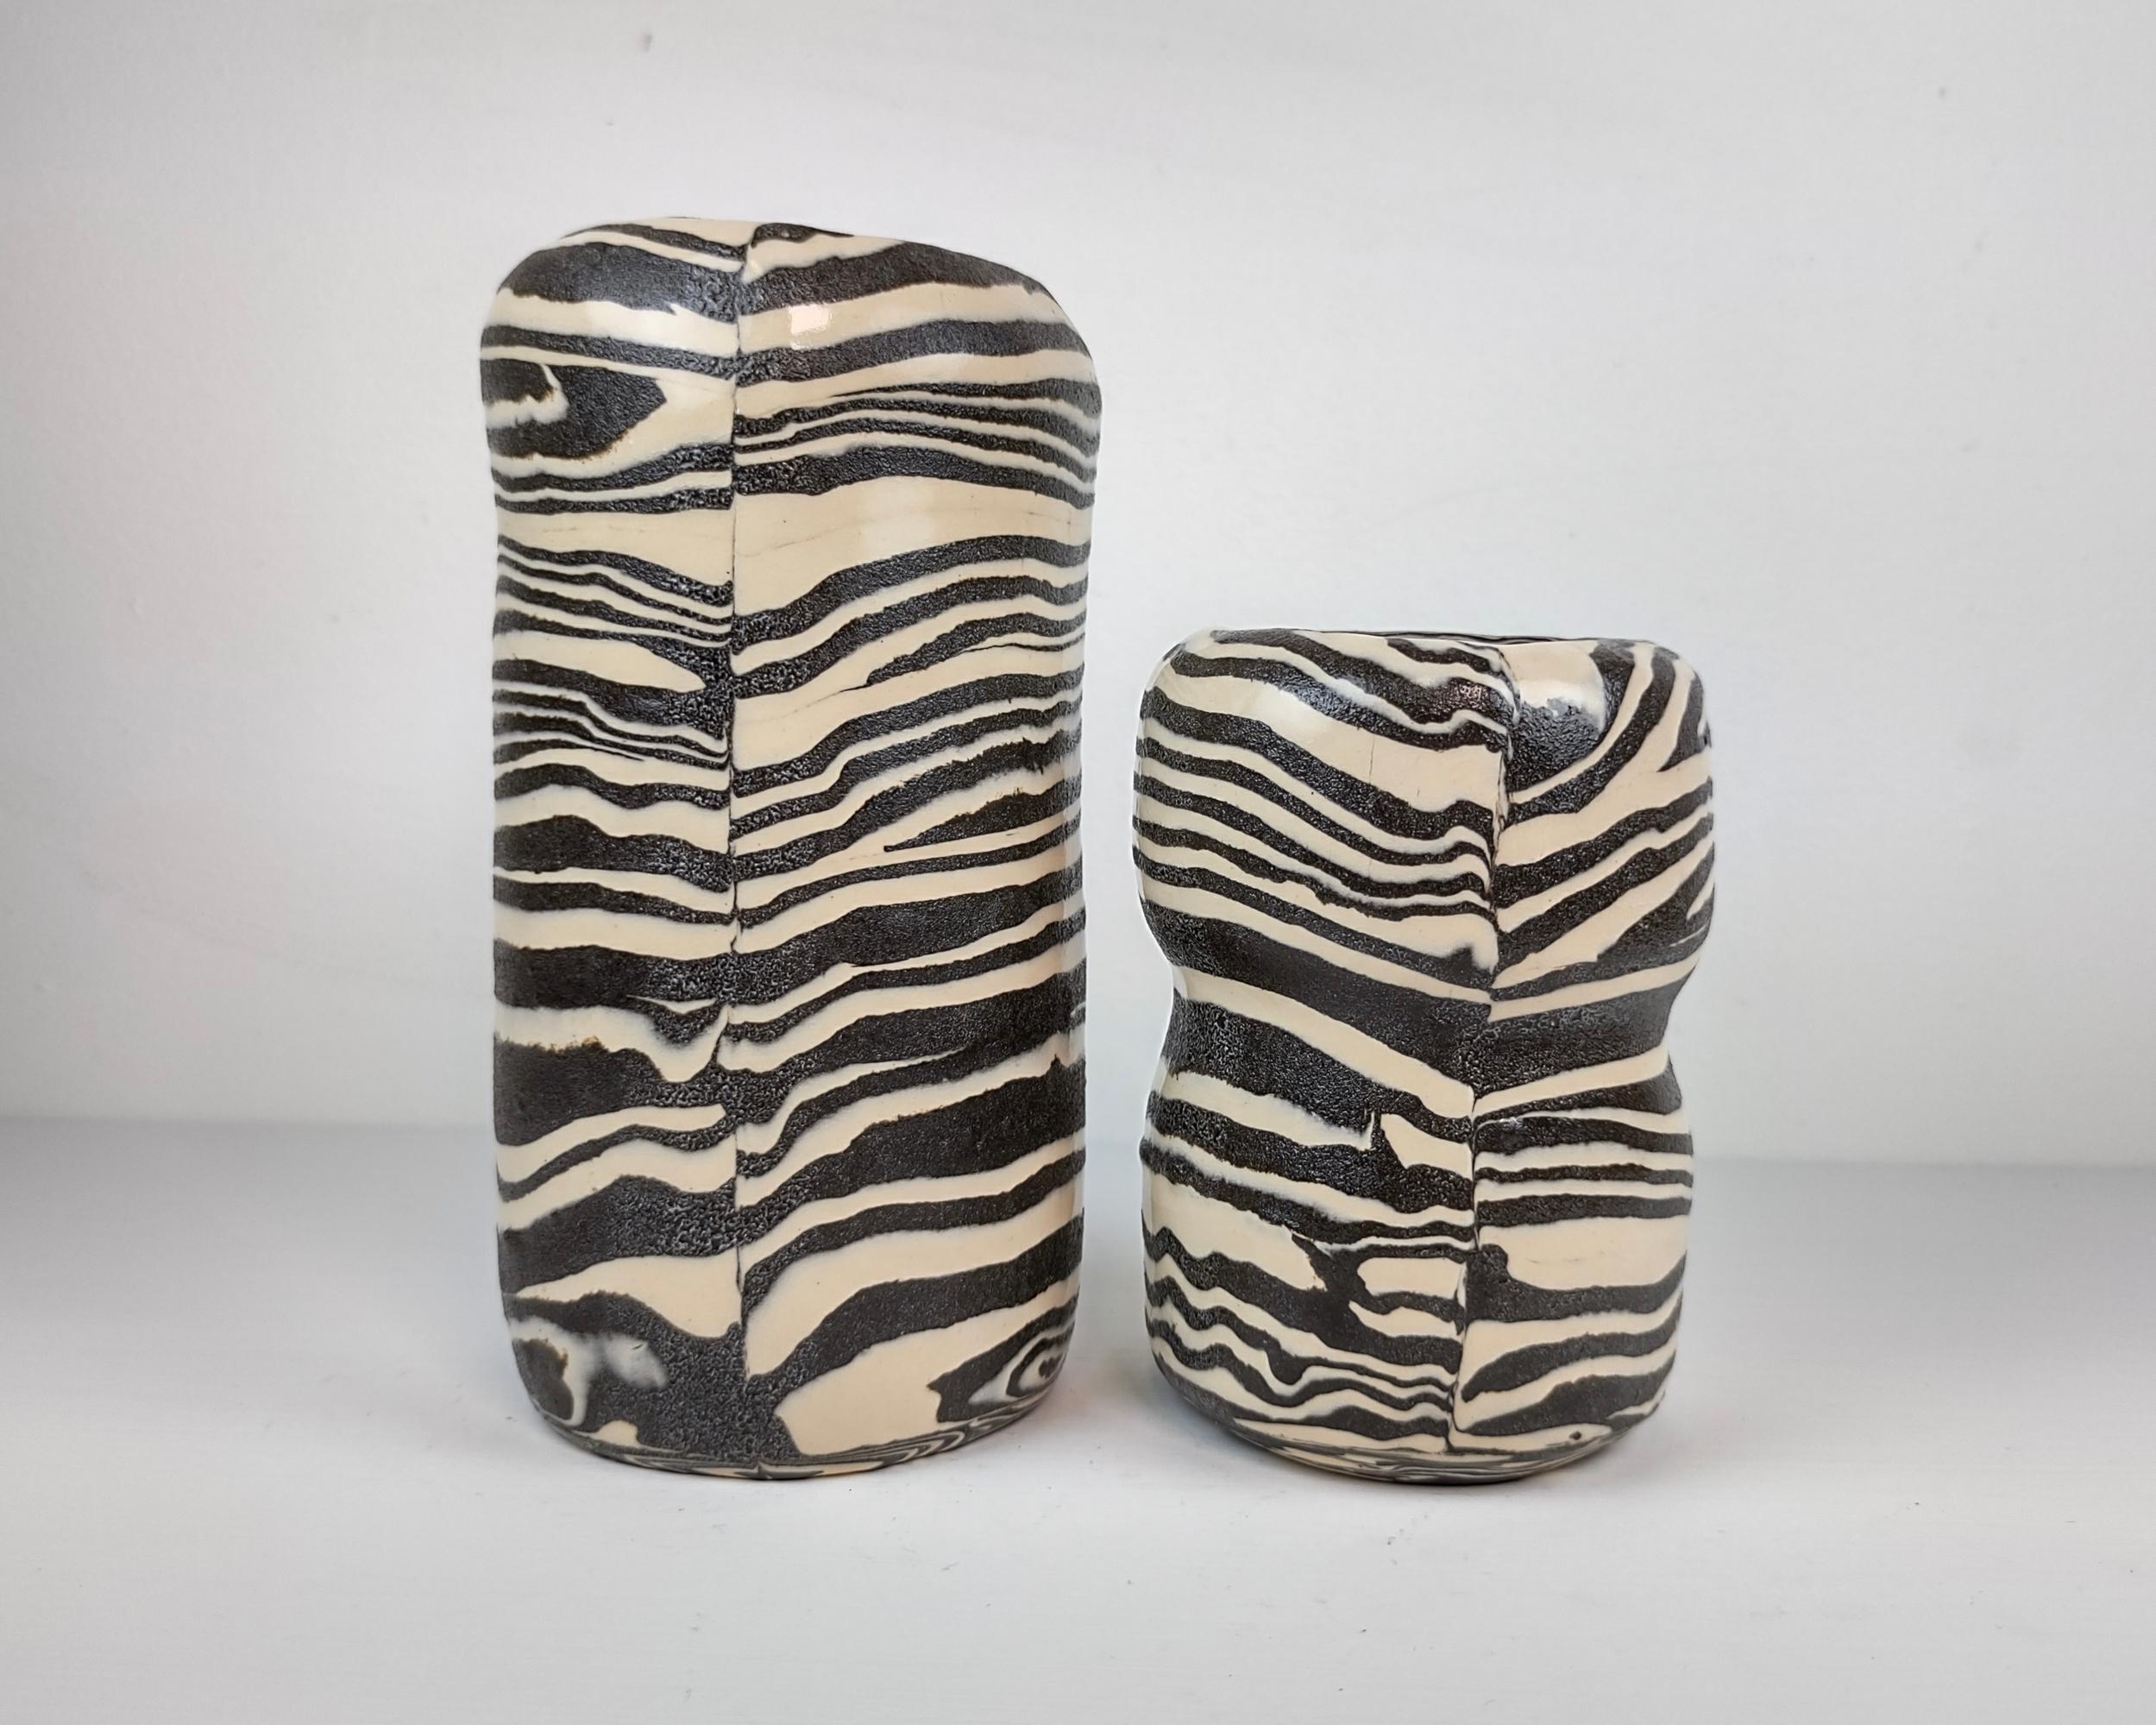 Each vase is formed by putting a slab of alternating clays together before forming into a cylinder and sculpting to the finished shape. Before each firing stage, the clay smudges are sanded and polished away to create sharpness and definition